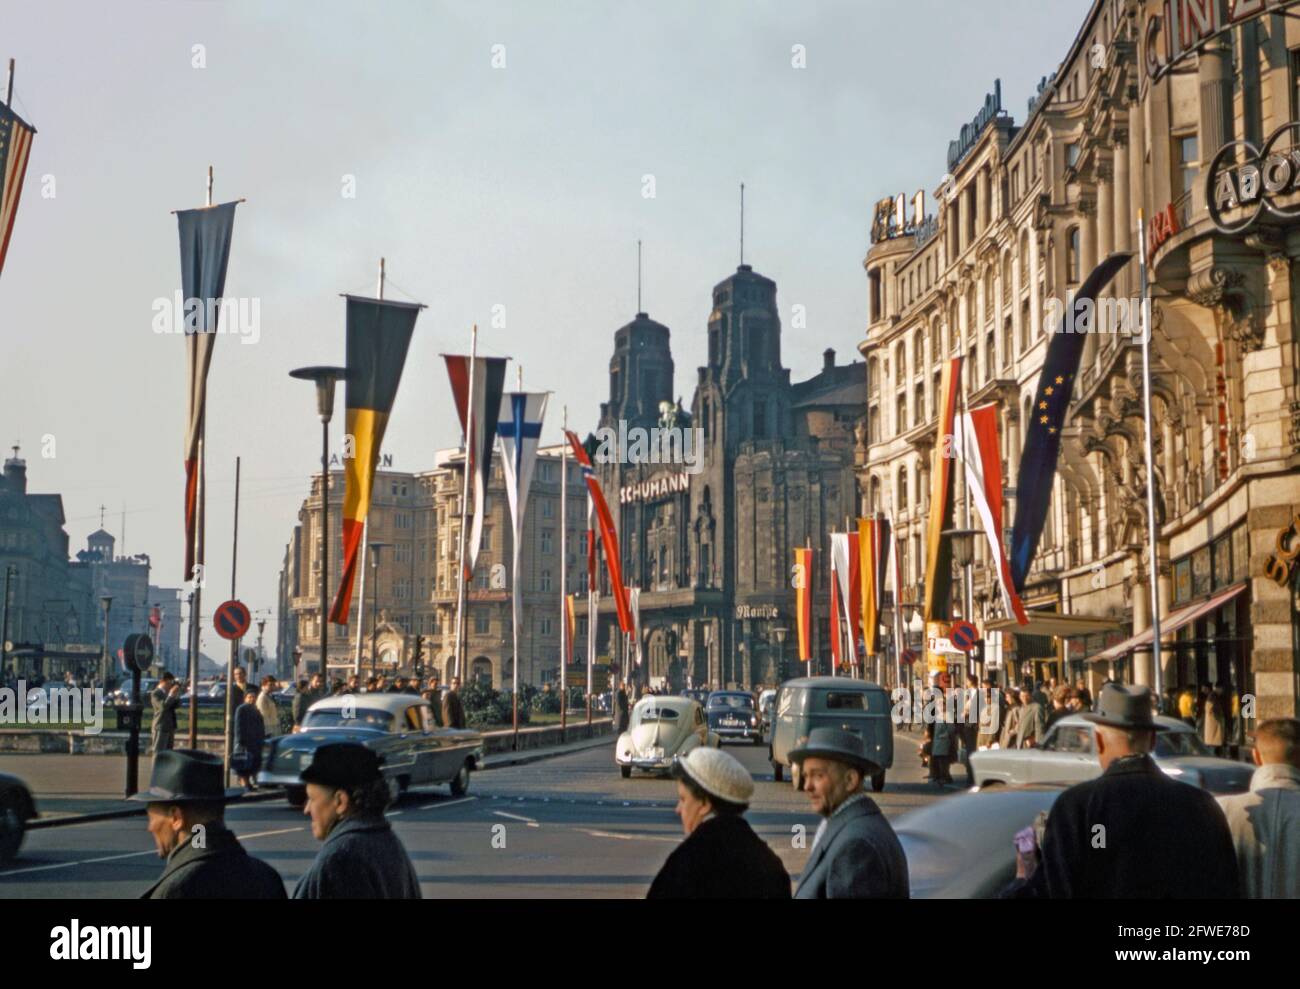 A view looking north at Am Hauptbahnhof at its intersection with Kaiserstasse, Frankfurt am Main Germany c. 1958. People are going to and from the main railway station (located to the left of this image) and the flags of many nations are on display. Also being flown is the blue/gold flag of The Council of Europe (right). It dates back to 1955. Centre is the facade of the Circus-Theater Albert Schumann What had remained of the building after Allied bombing in 1944 was demolished in 1960. This image is from an old amateur 35mm Kodak colour transparency – a vintage 1950s photograph. Stock Photo